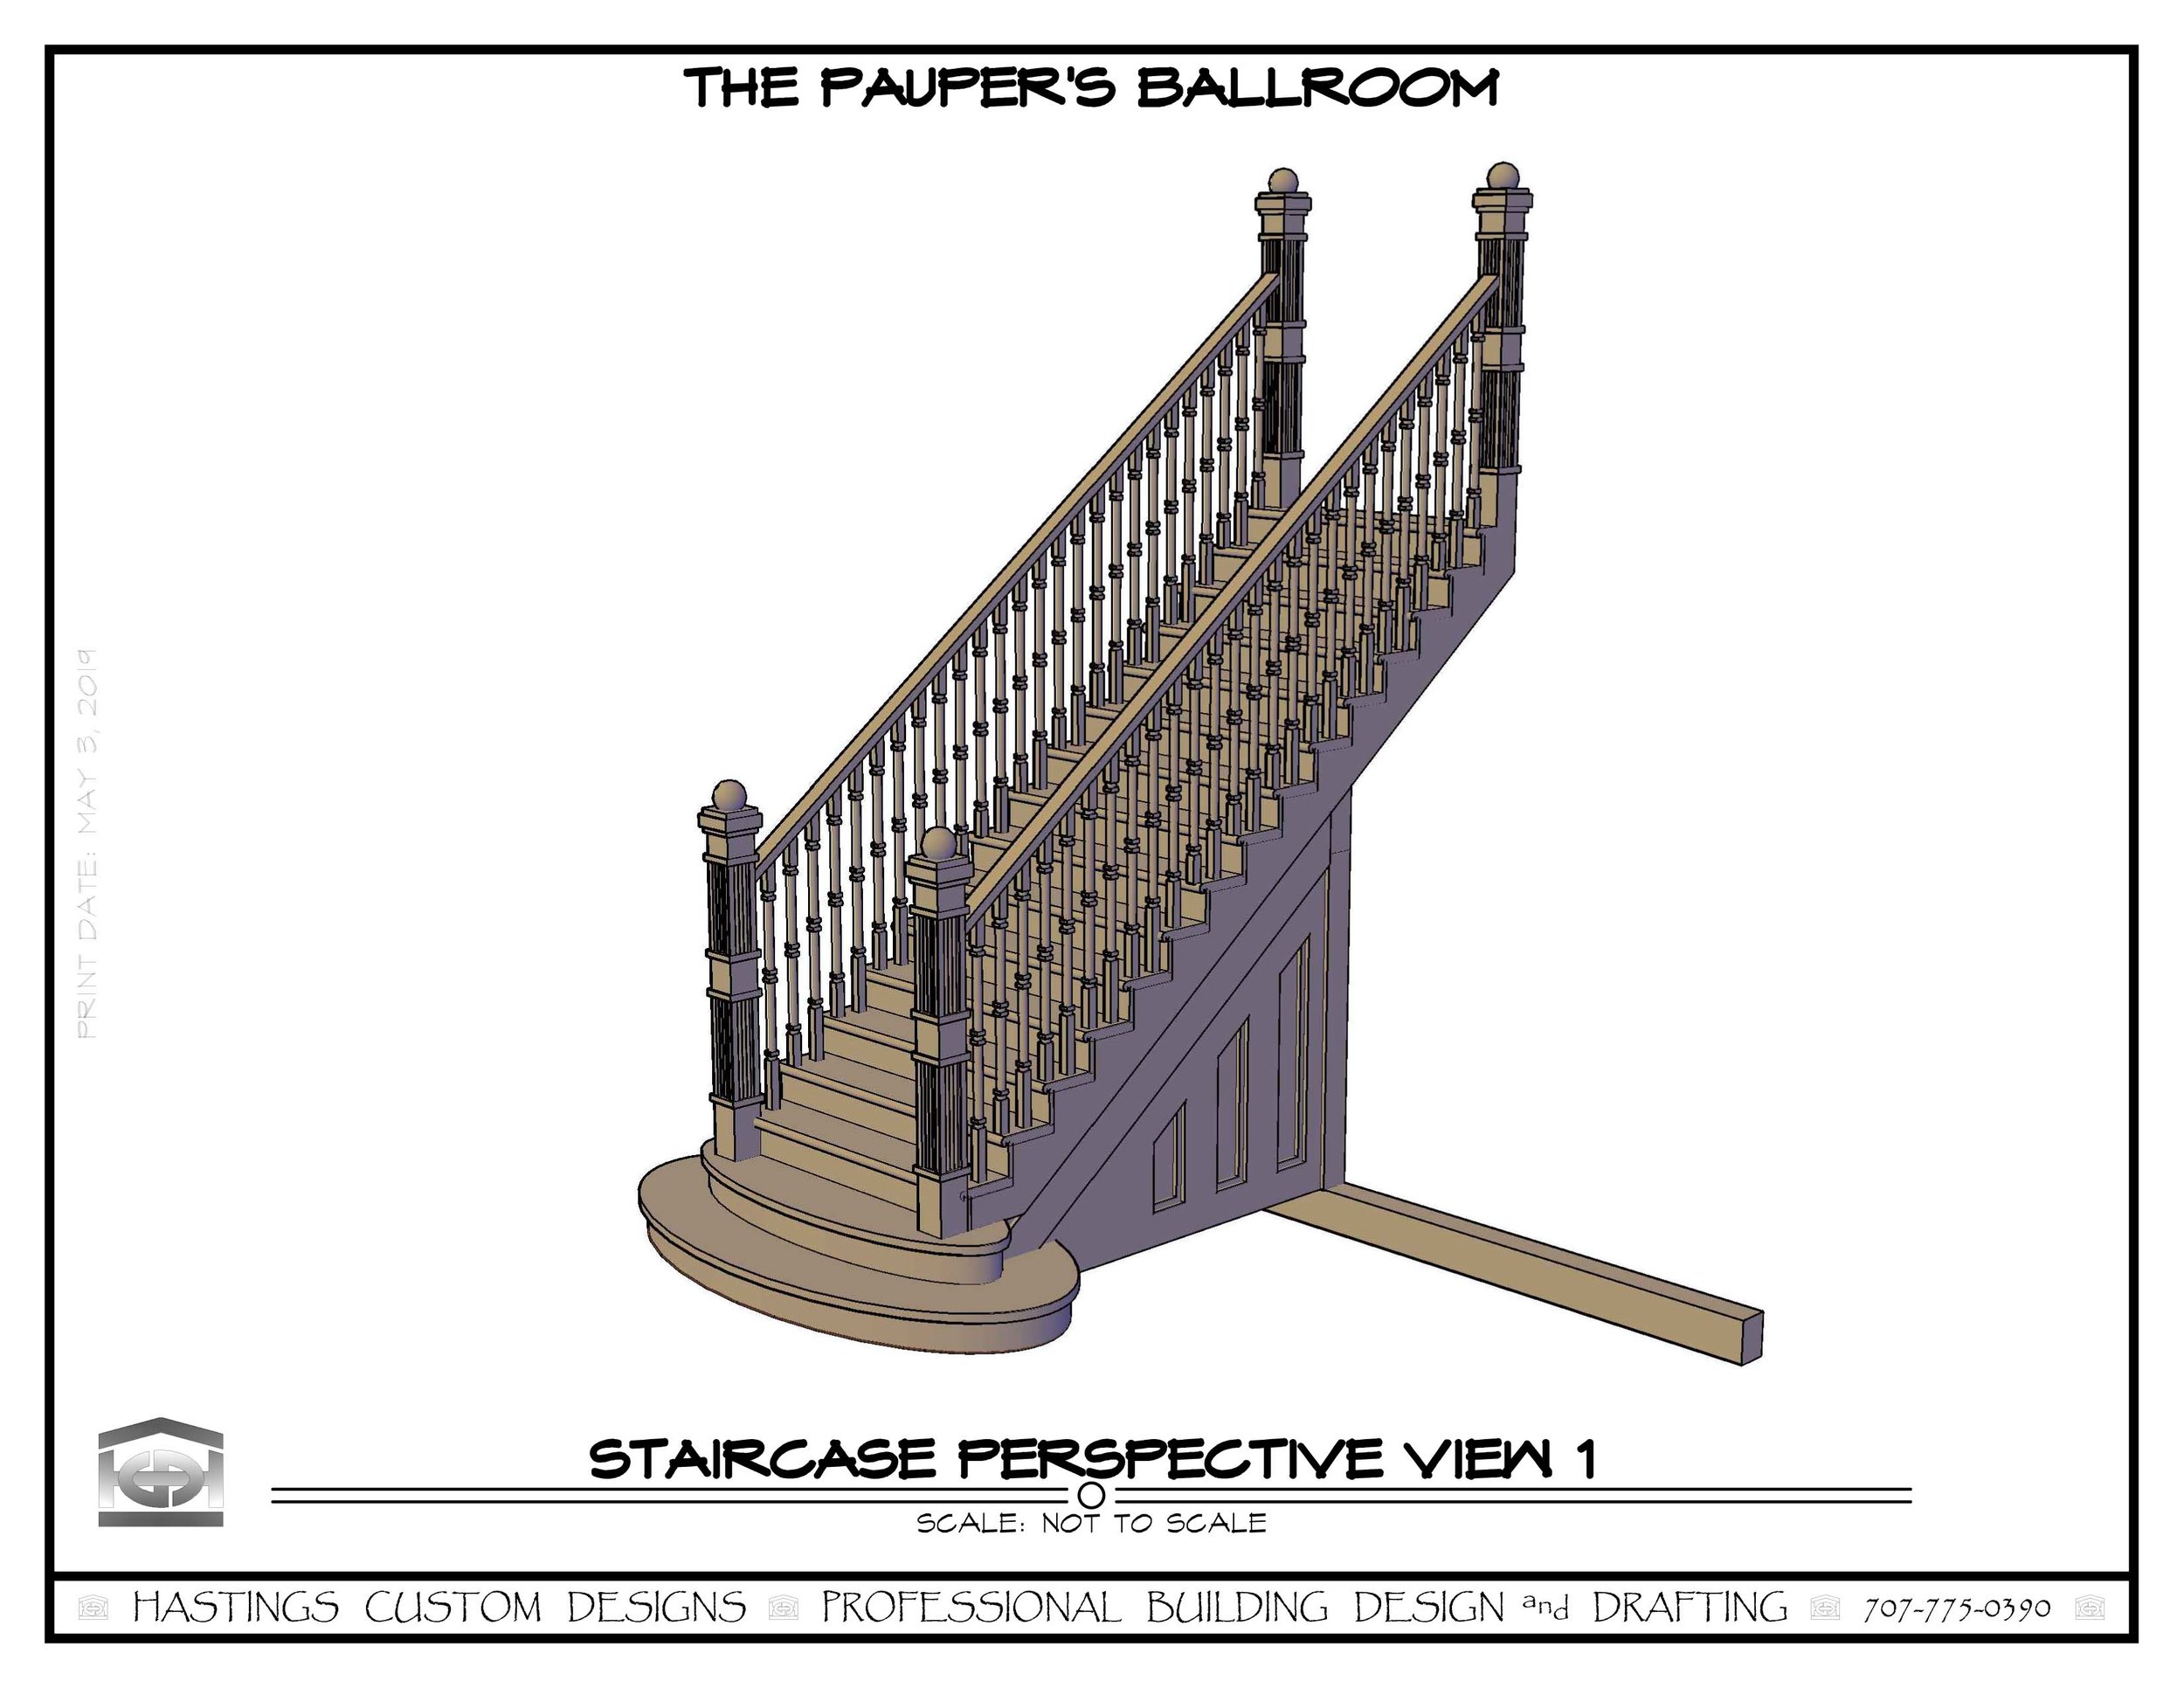 Perspective Drawing of the Pauper's Ballroom